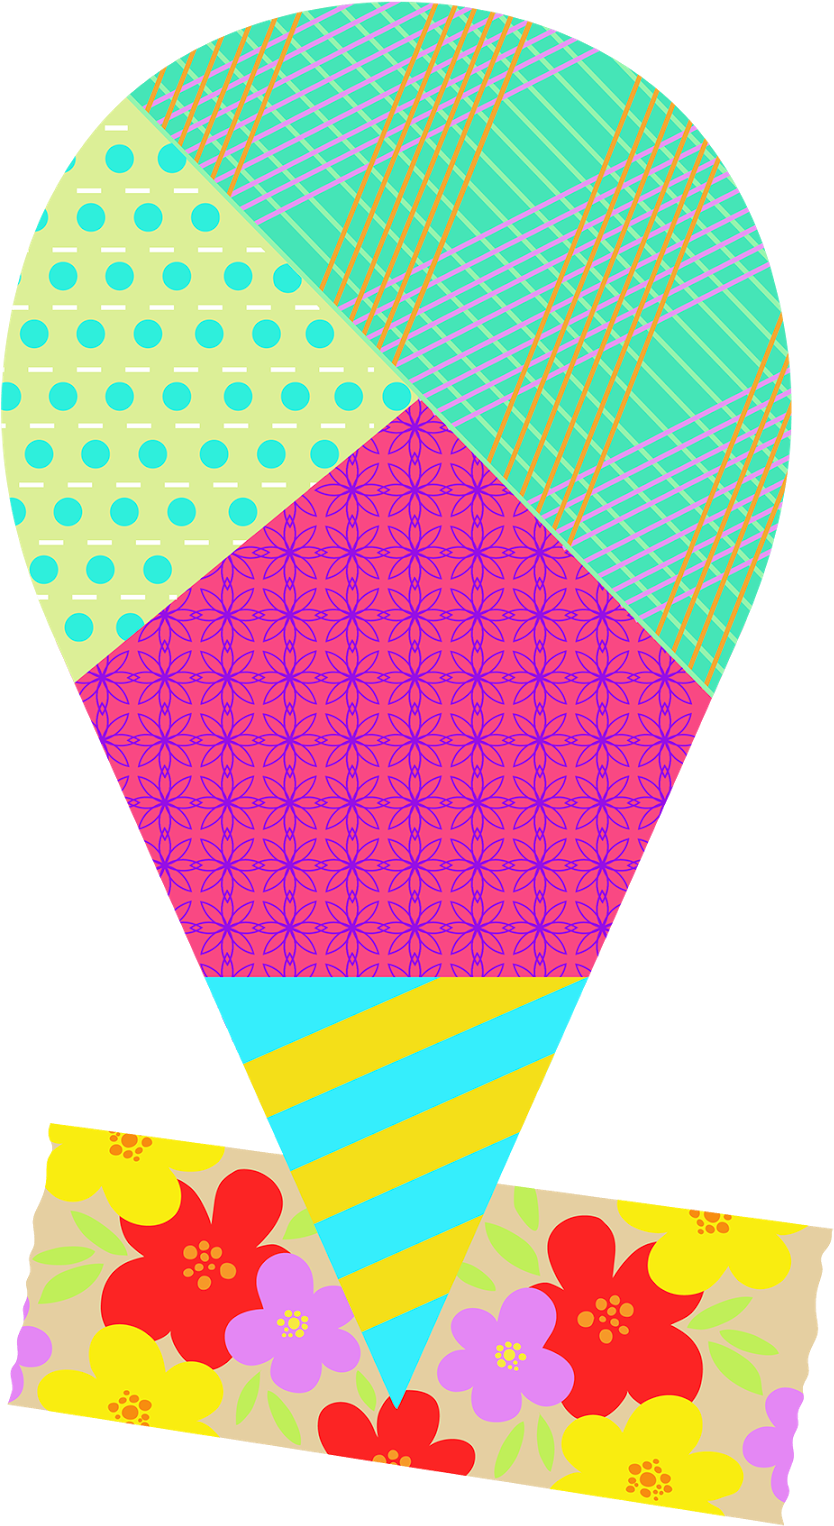 I Must Admit That My Mind Is Overflowing Trying To - Hot Air Balloon (901x1600)